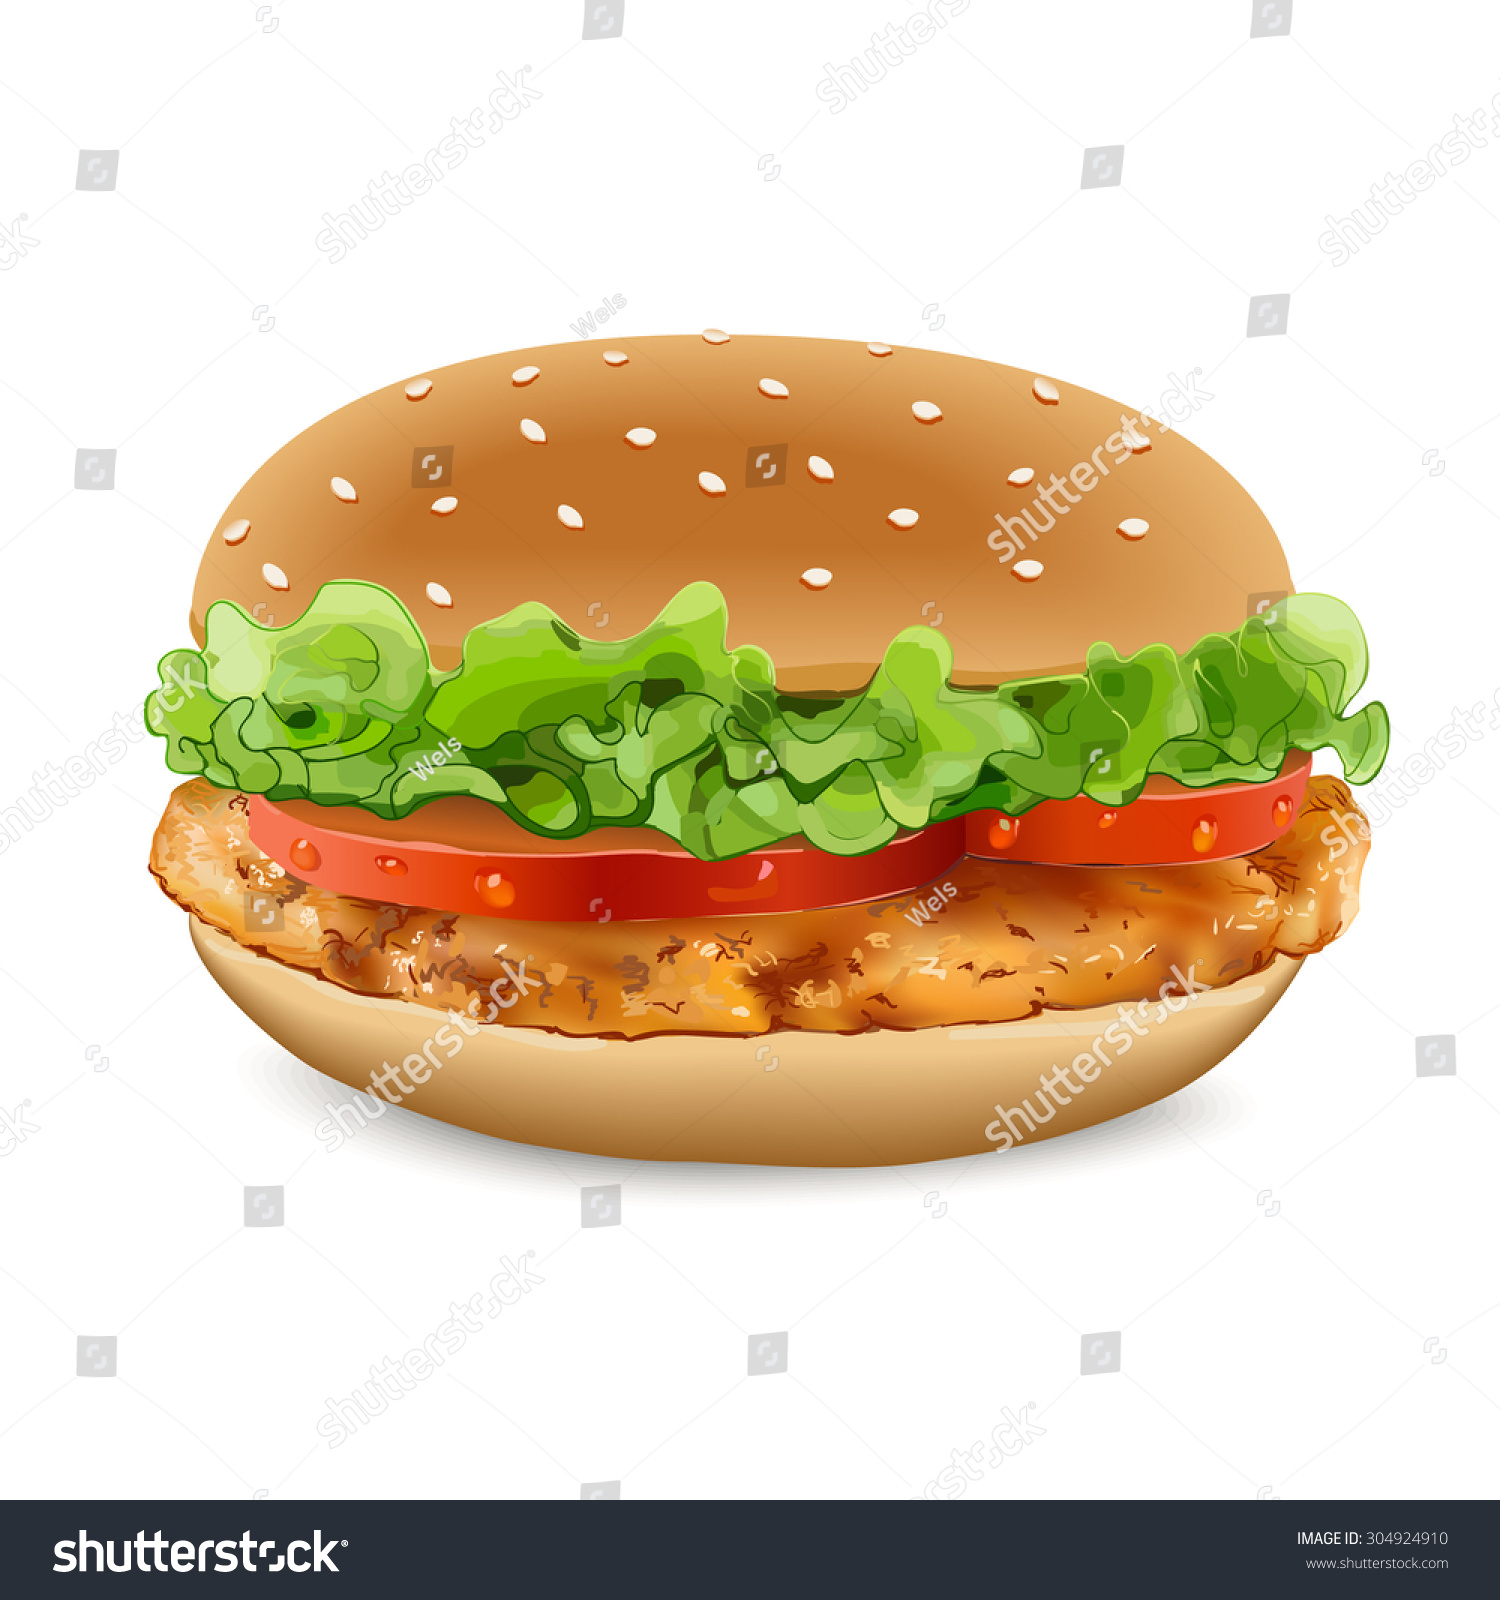 SVG of Realistic illustration of chicken burger. Tasty chicken burger include cutlet, tomato and salad. svg